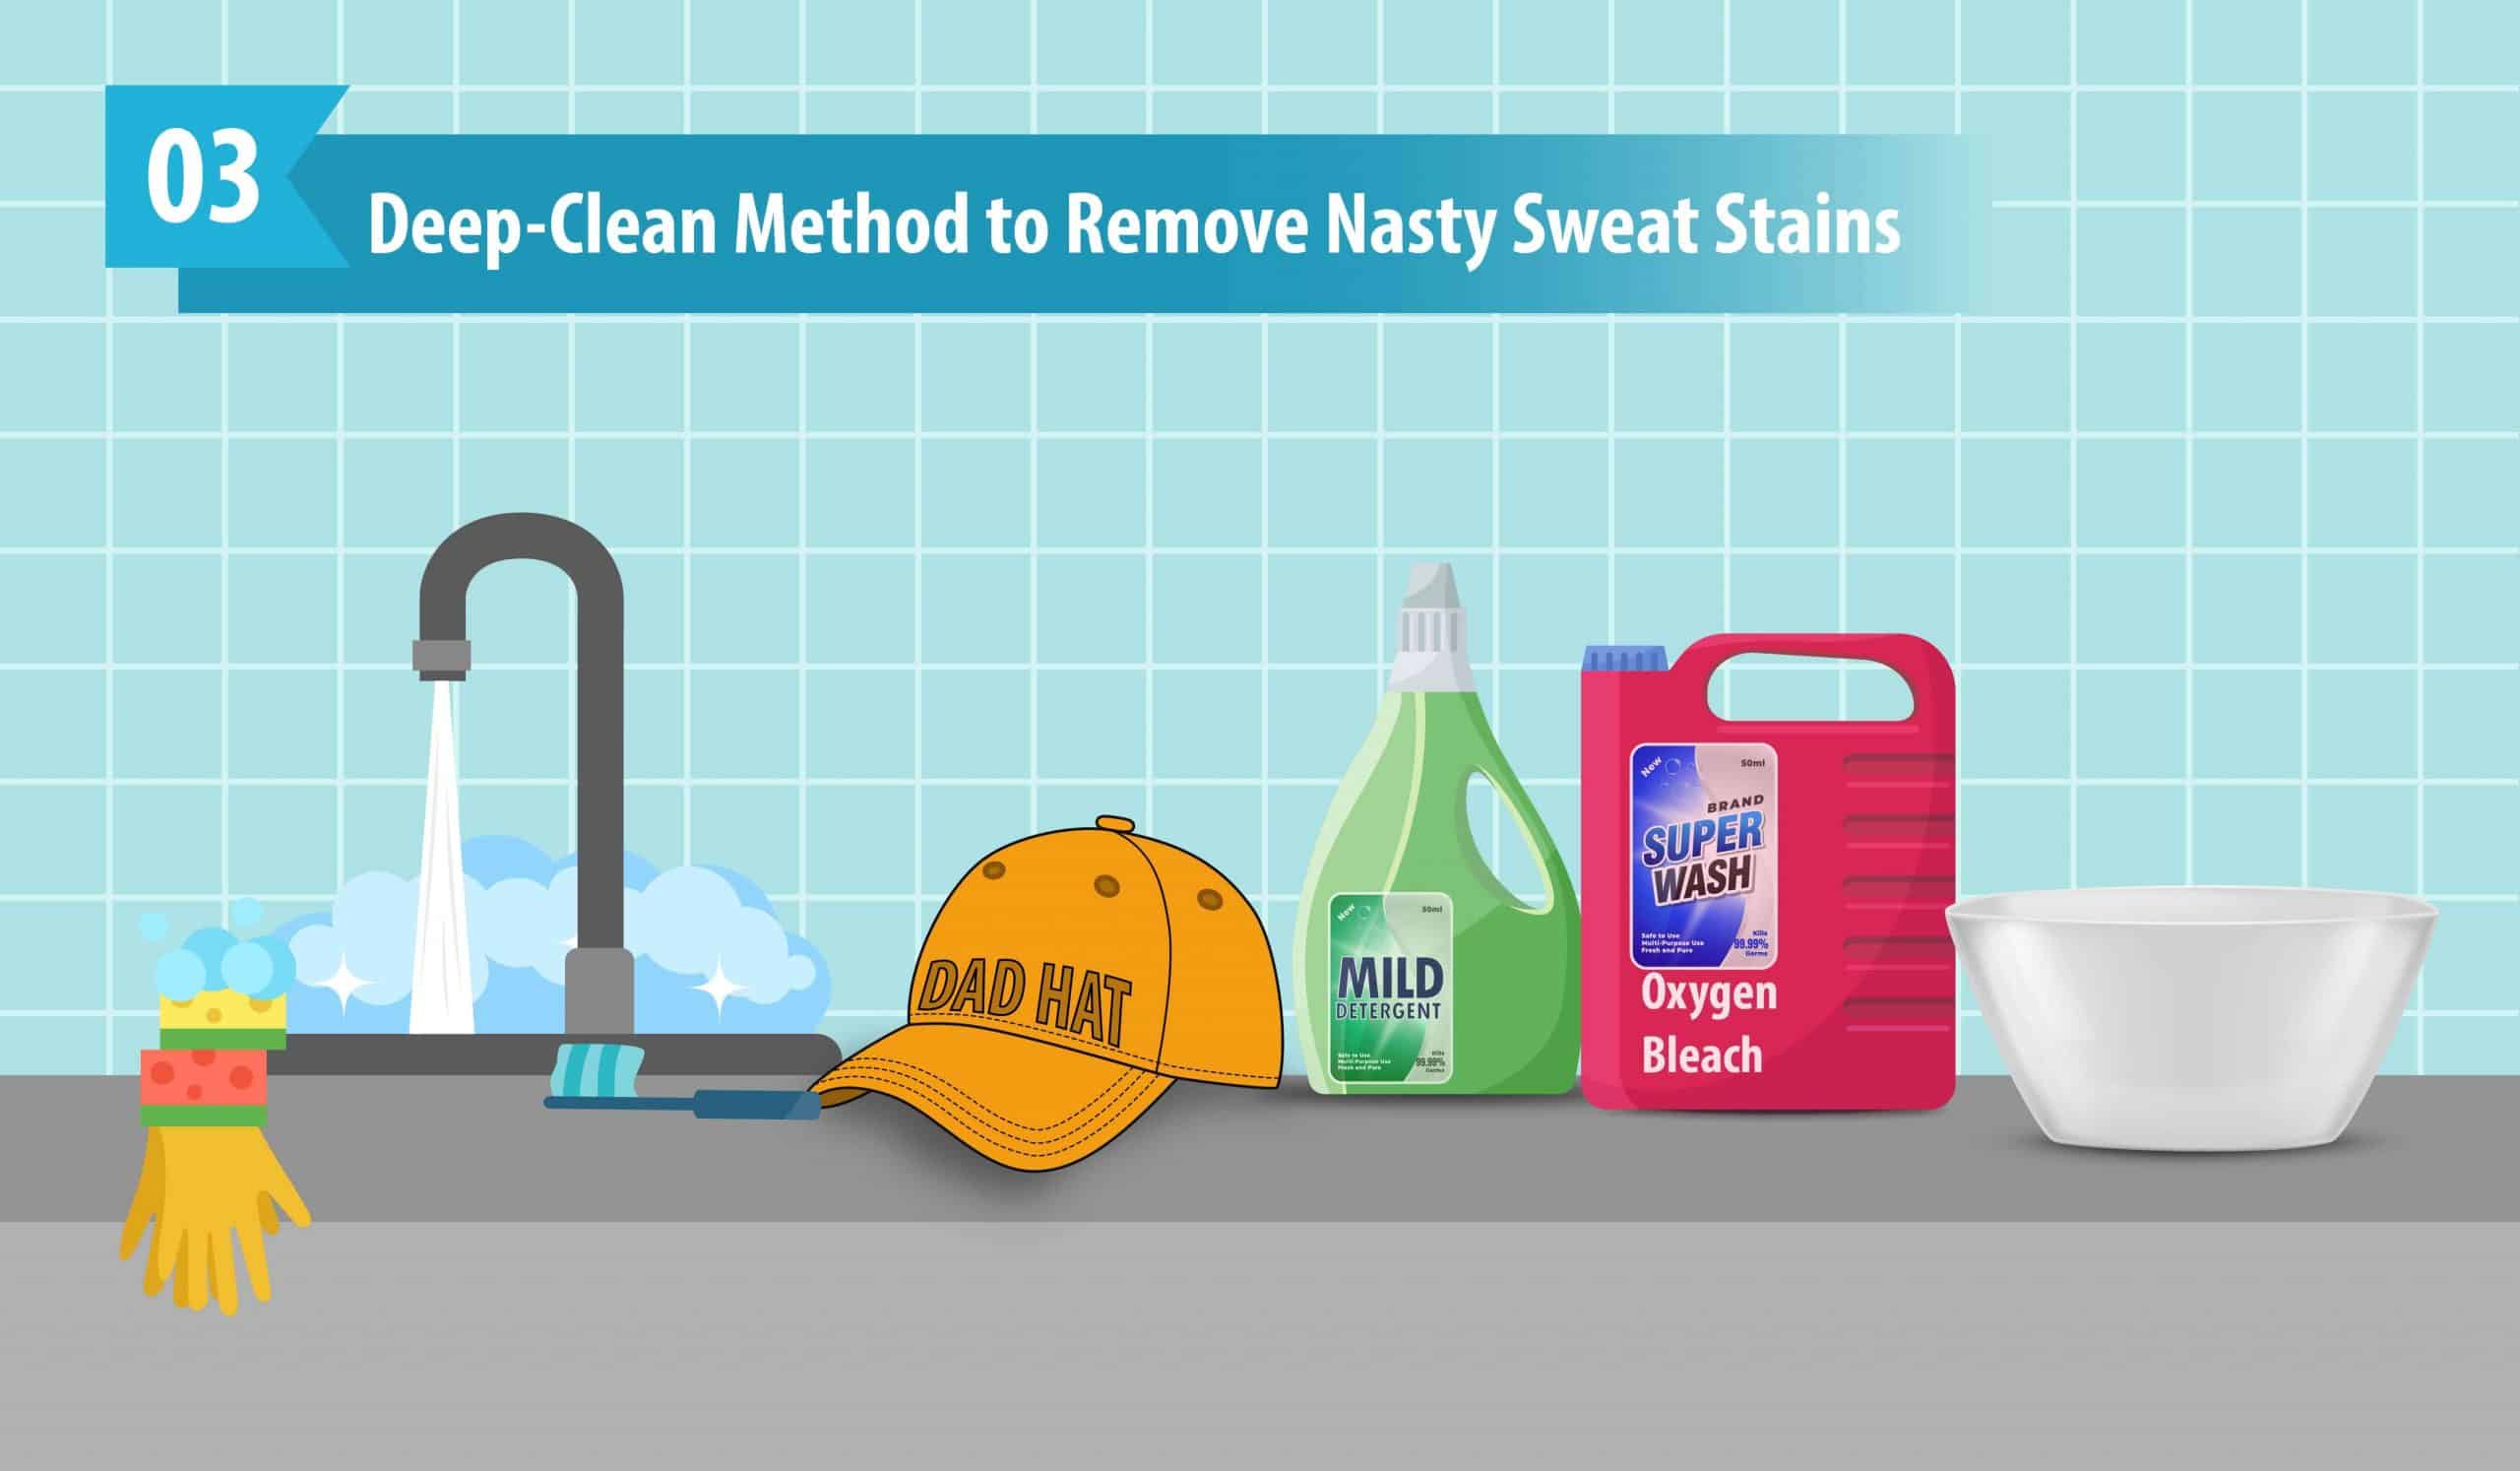 Deep-Clean Method to Remove Nasty Sweat Stains